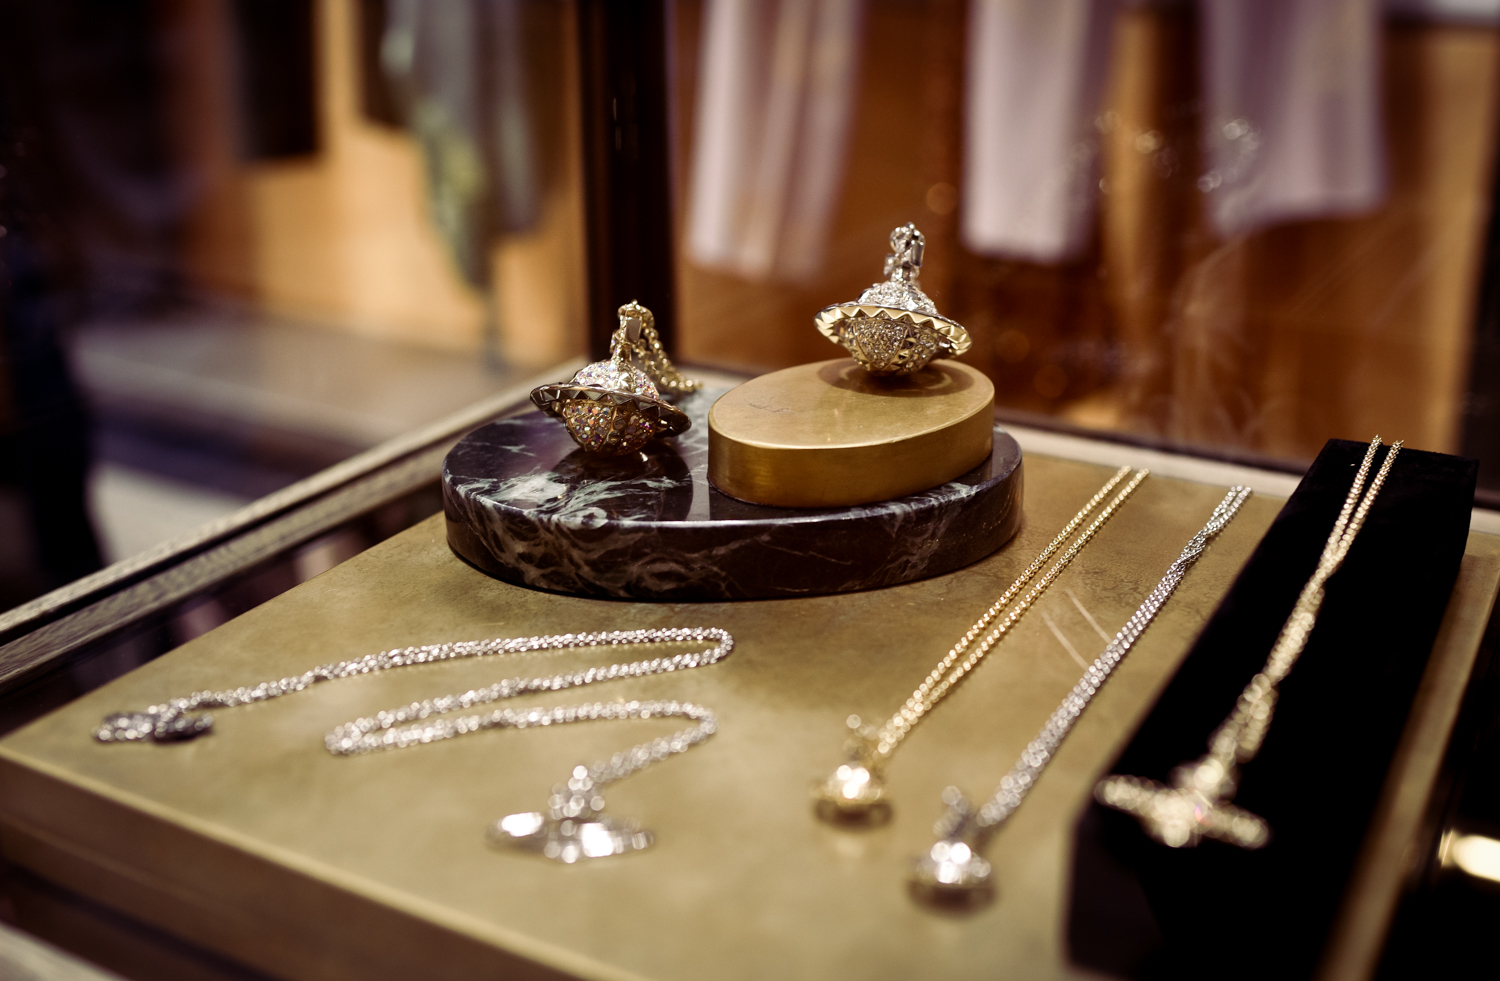 The jewelry display inside the Vivienne Westwood New York City store. Two orb pendants take prominence in the photo.